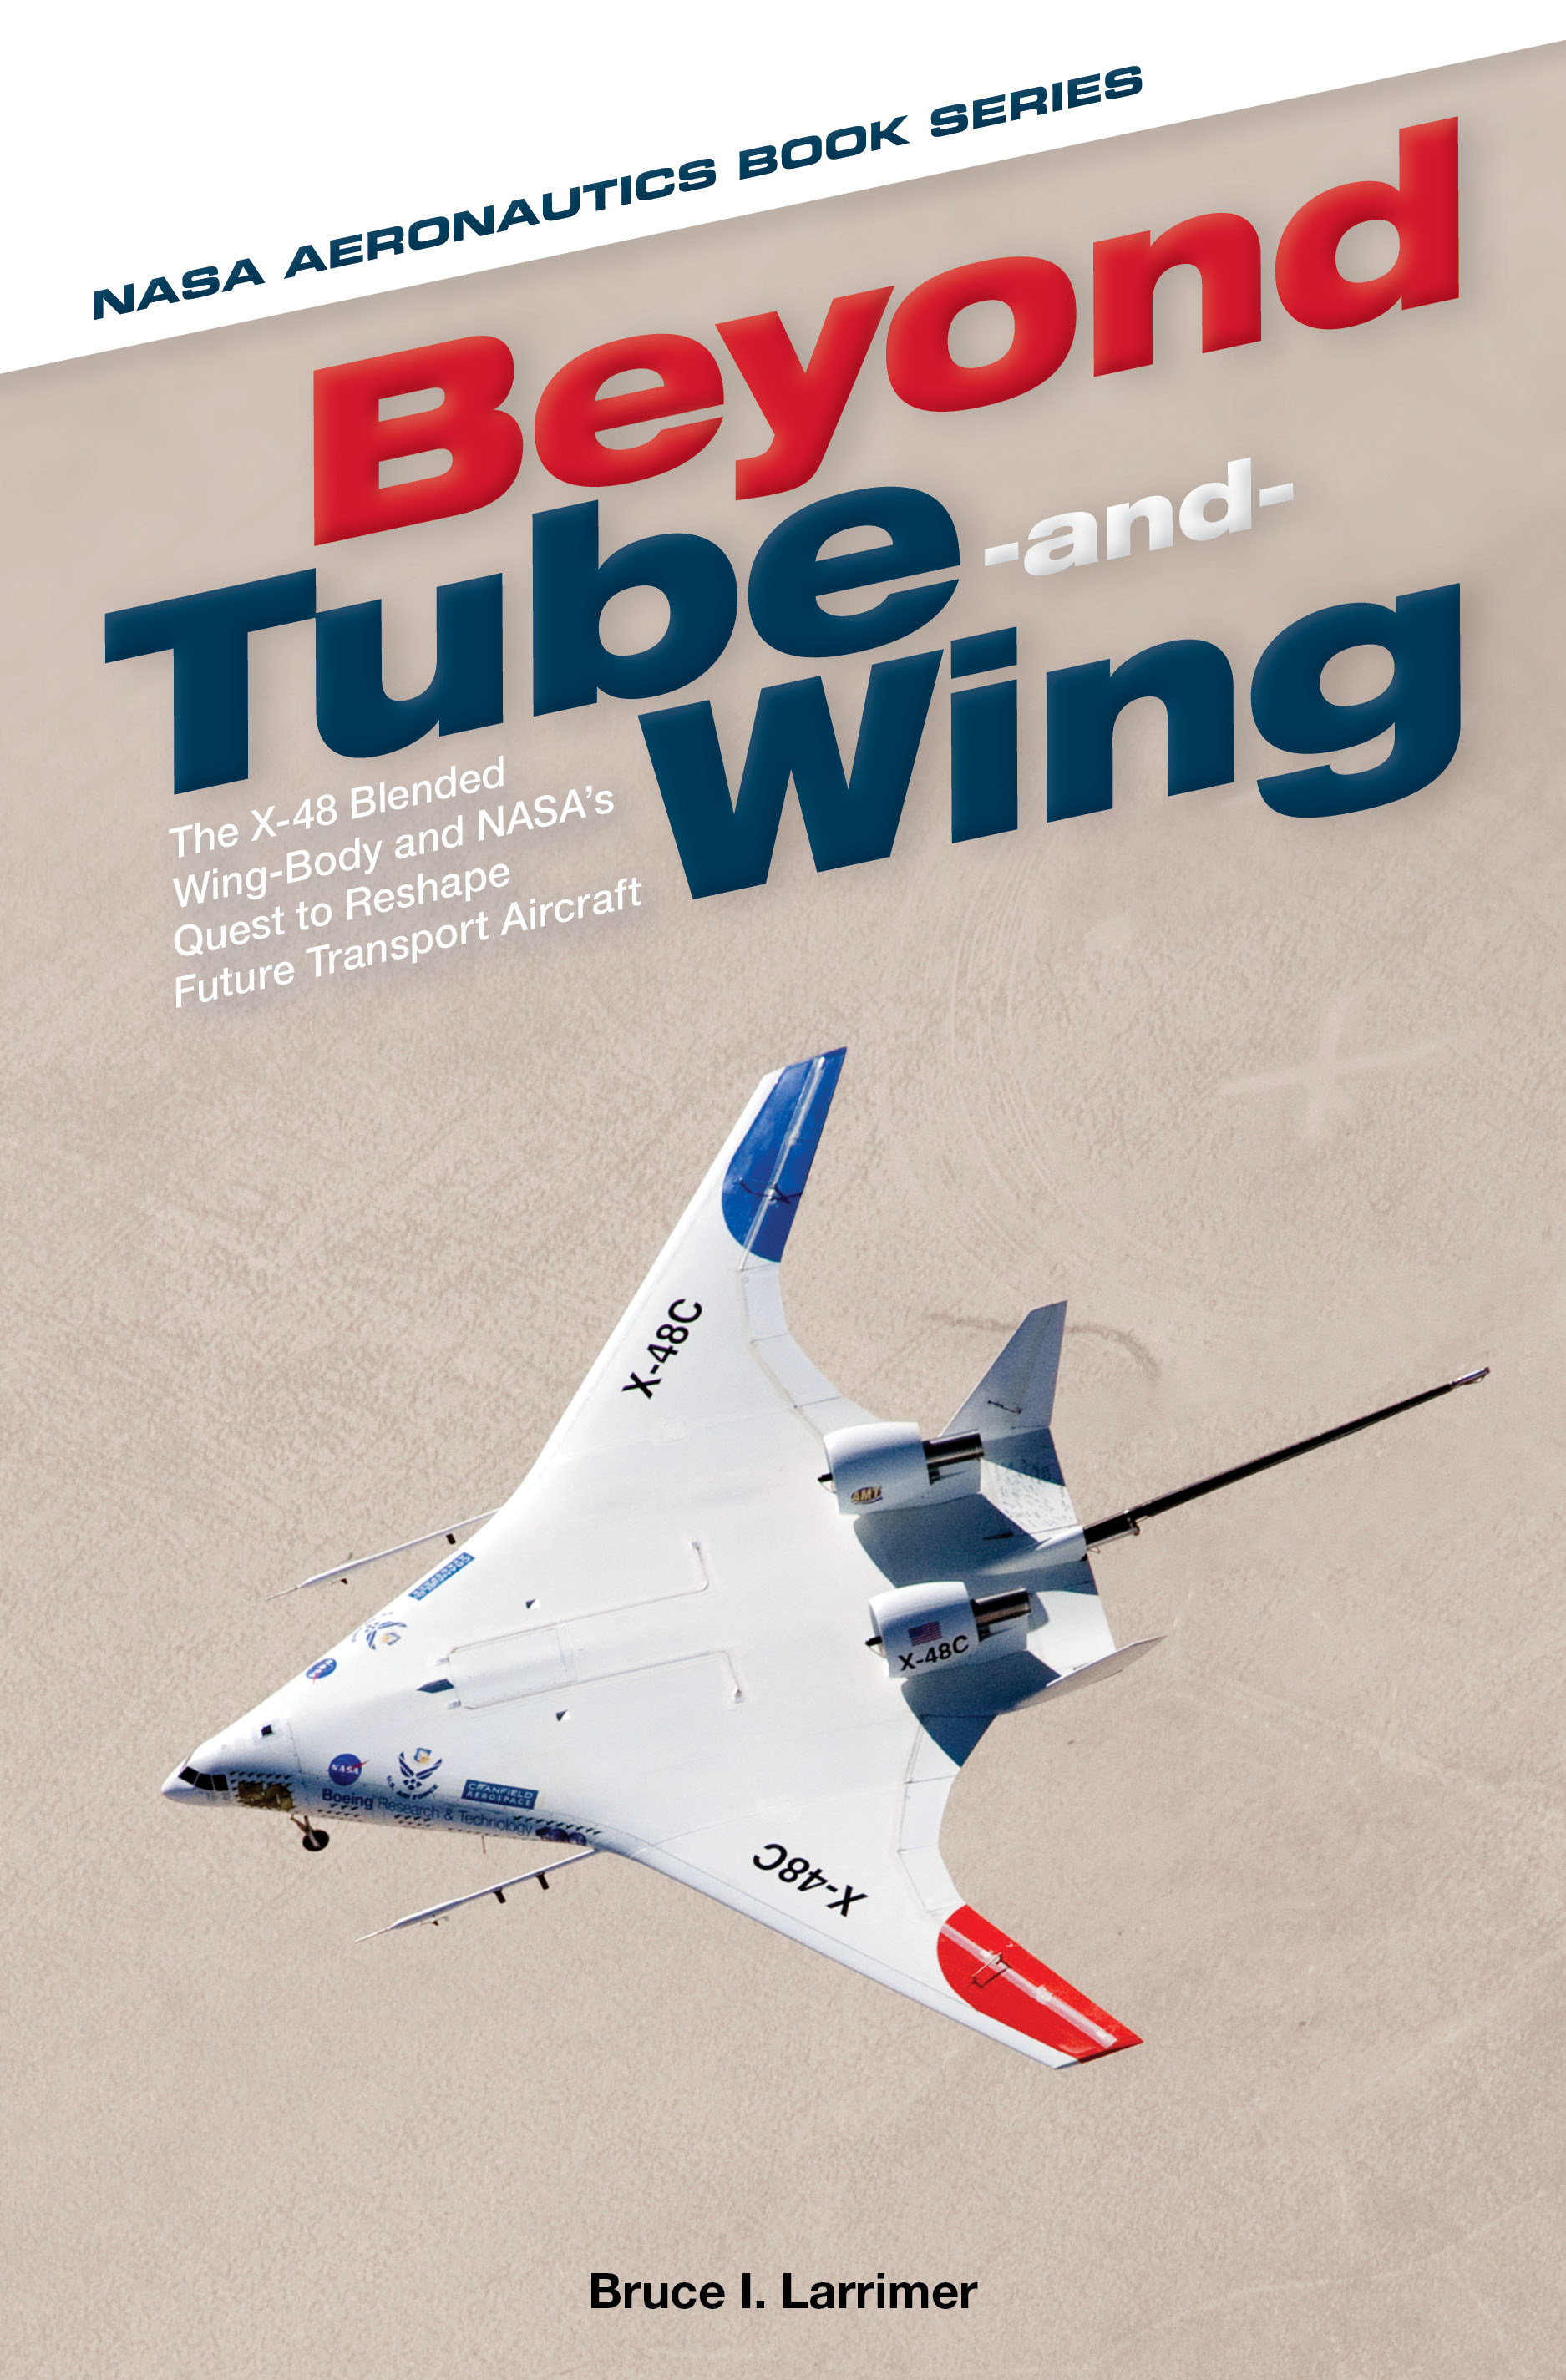 https://www.nasa.gov/wp-content/uploads/2020/11/beyond-tube-and-wing-front-cover.jpg